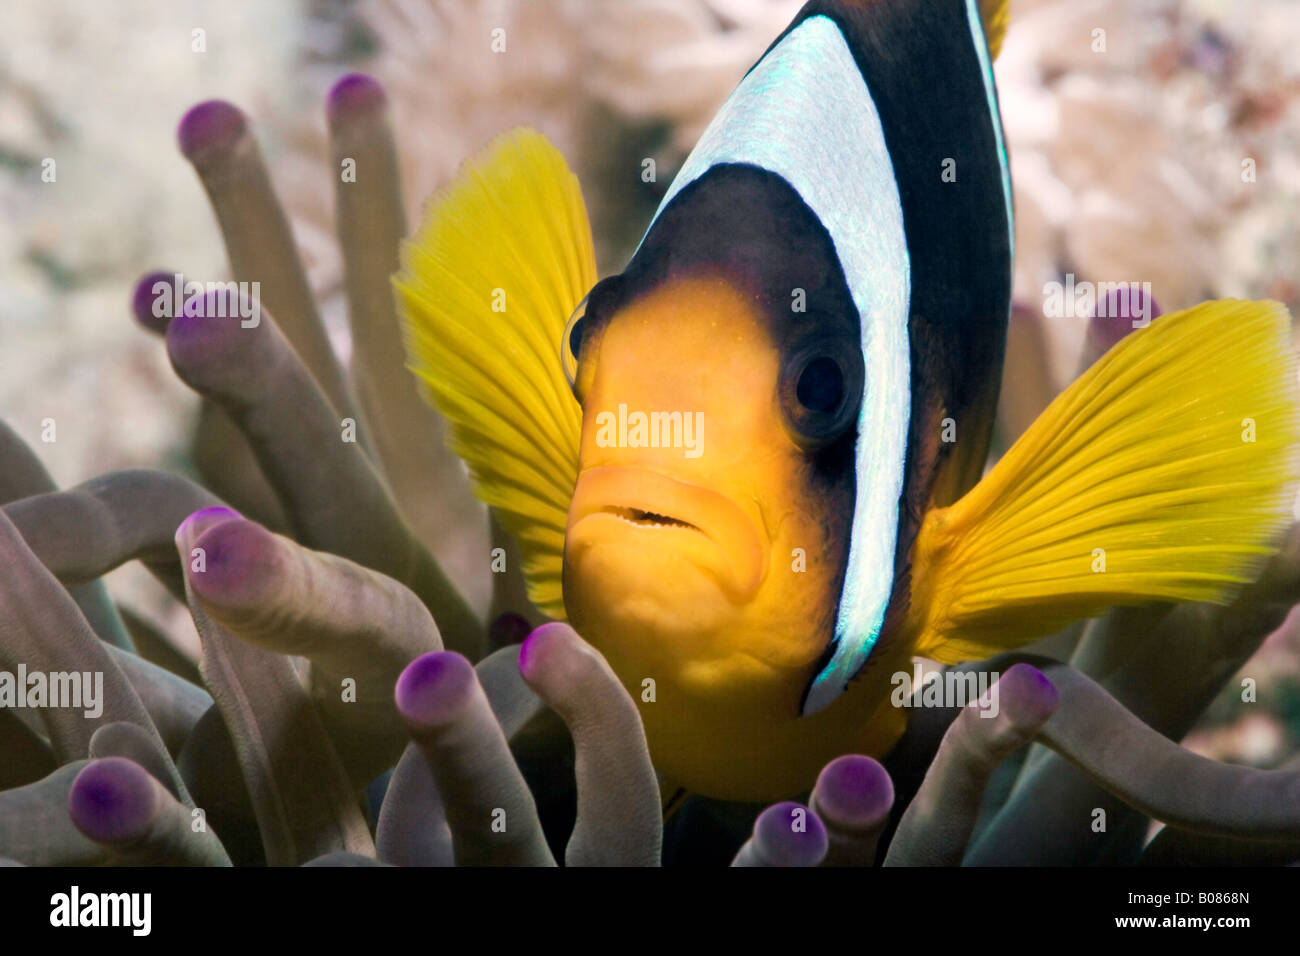 A Sebae Anemonefish or Clownfish, also known as a Northern Indian Damselfish. Stock Photo